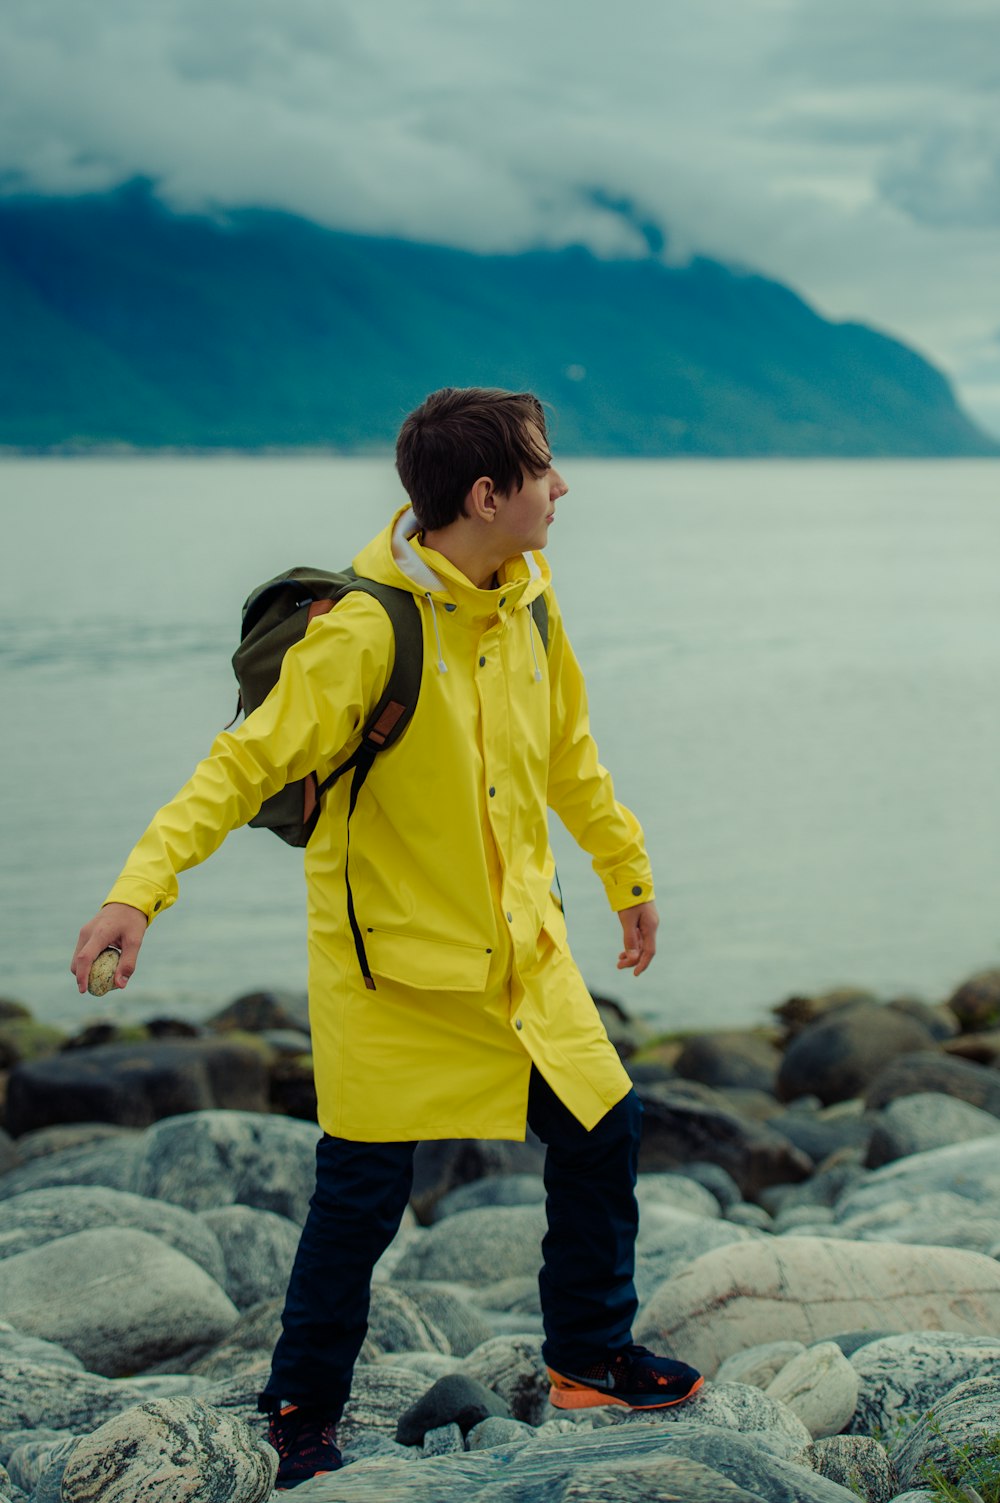 boy in yellow jacket standing on rock near body of water during daytime